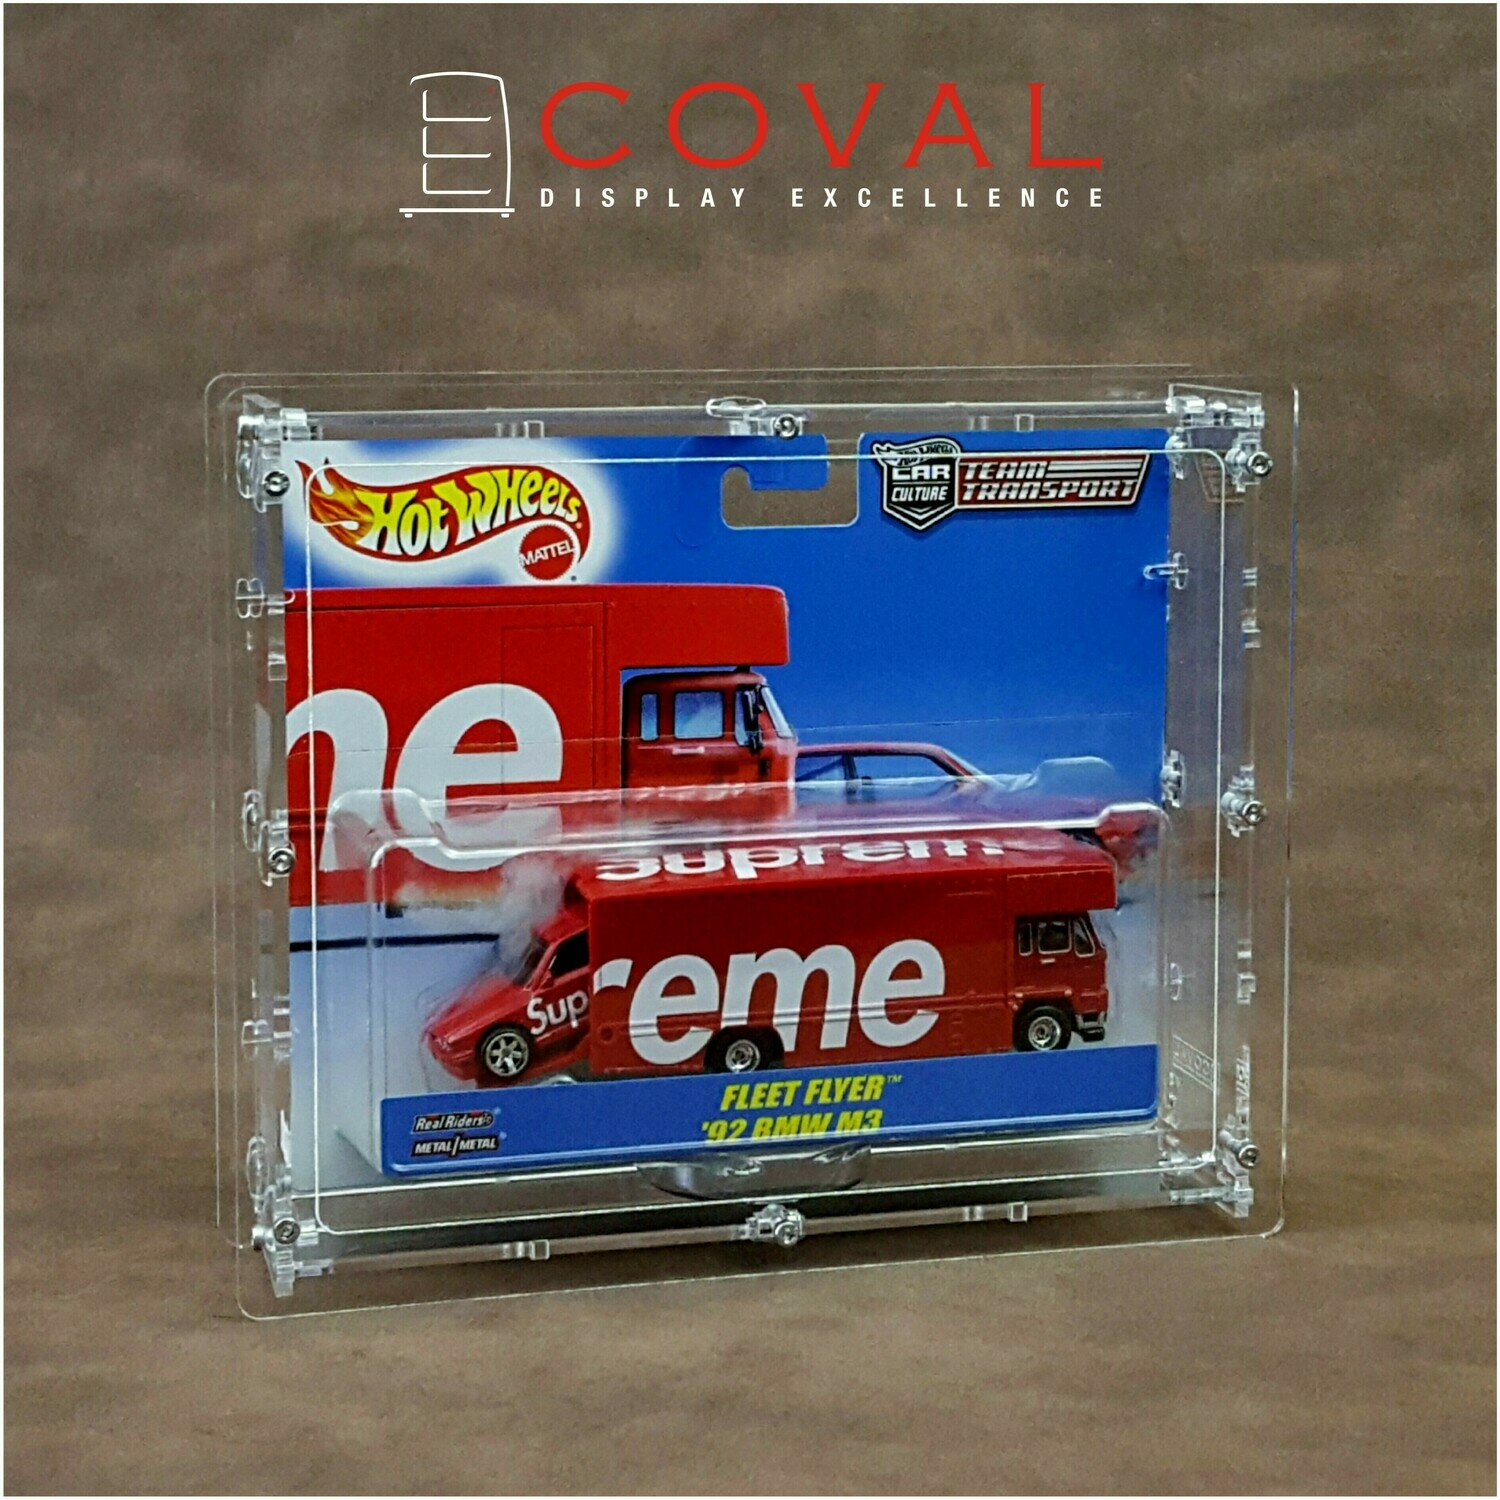 COVAL HDS-101 Acrylic Display Case for Carded Short Card Hot Wheels 